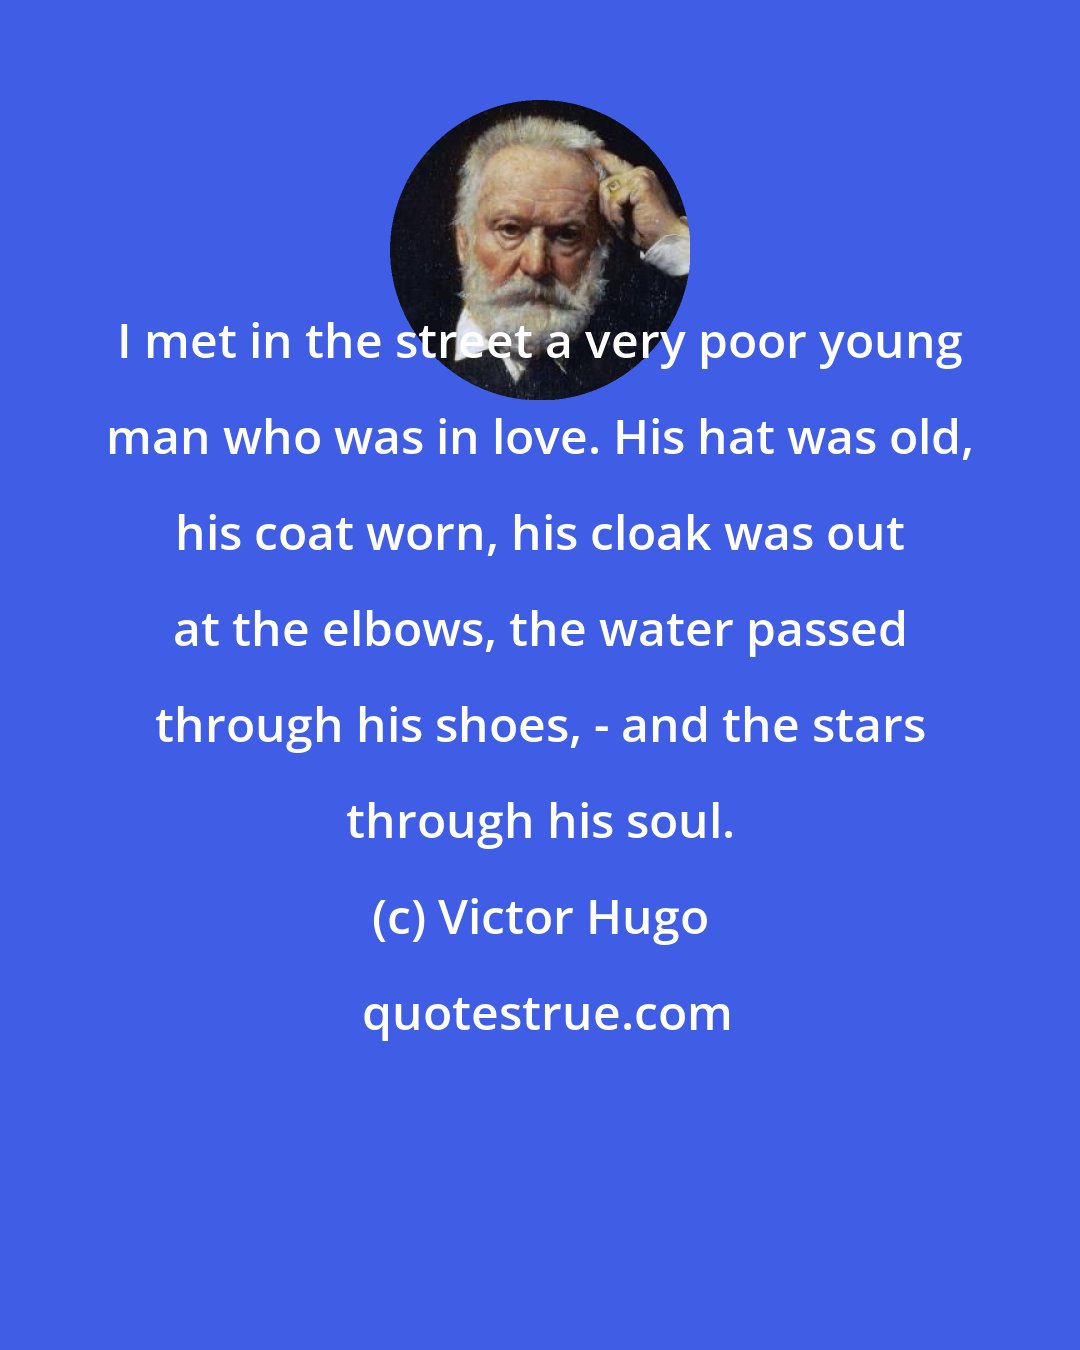 Victor Hugo: I met in the street a very poor young man who was in love. His hat was old, his coat worn, his cloak was out at the elbows, the water passed through his shoes, - and the stars through his soul.